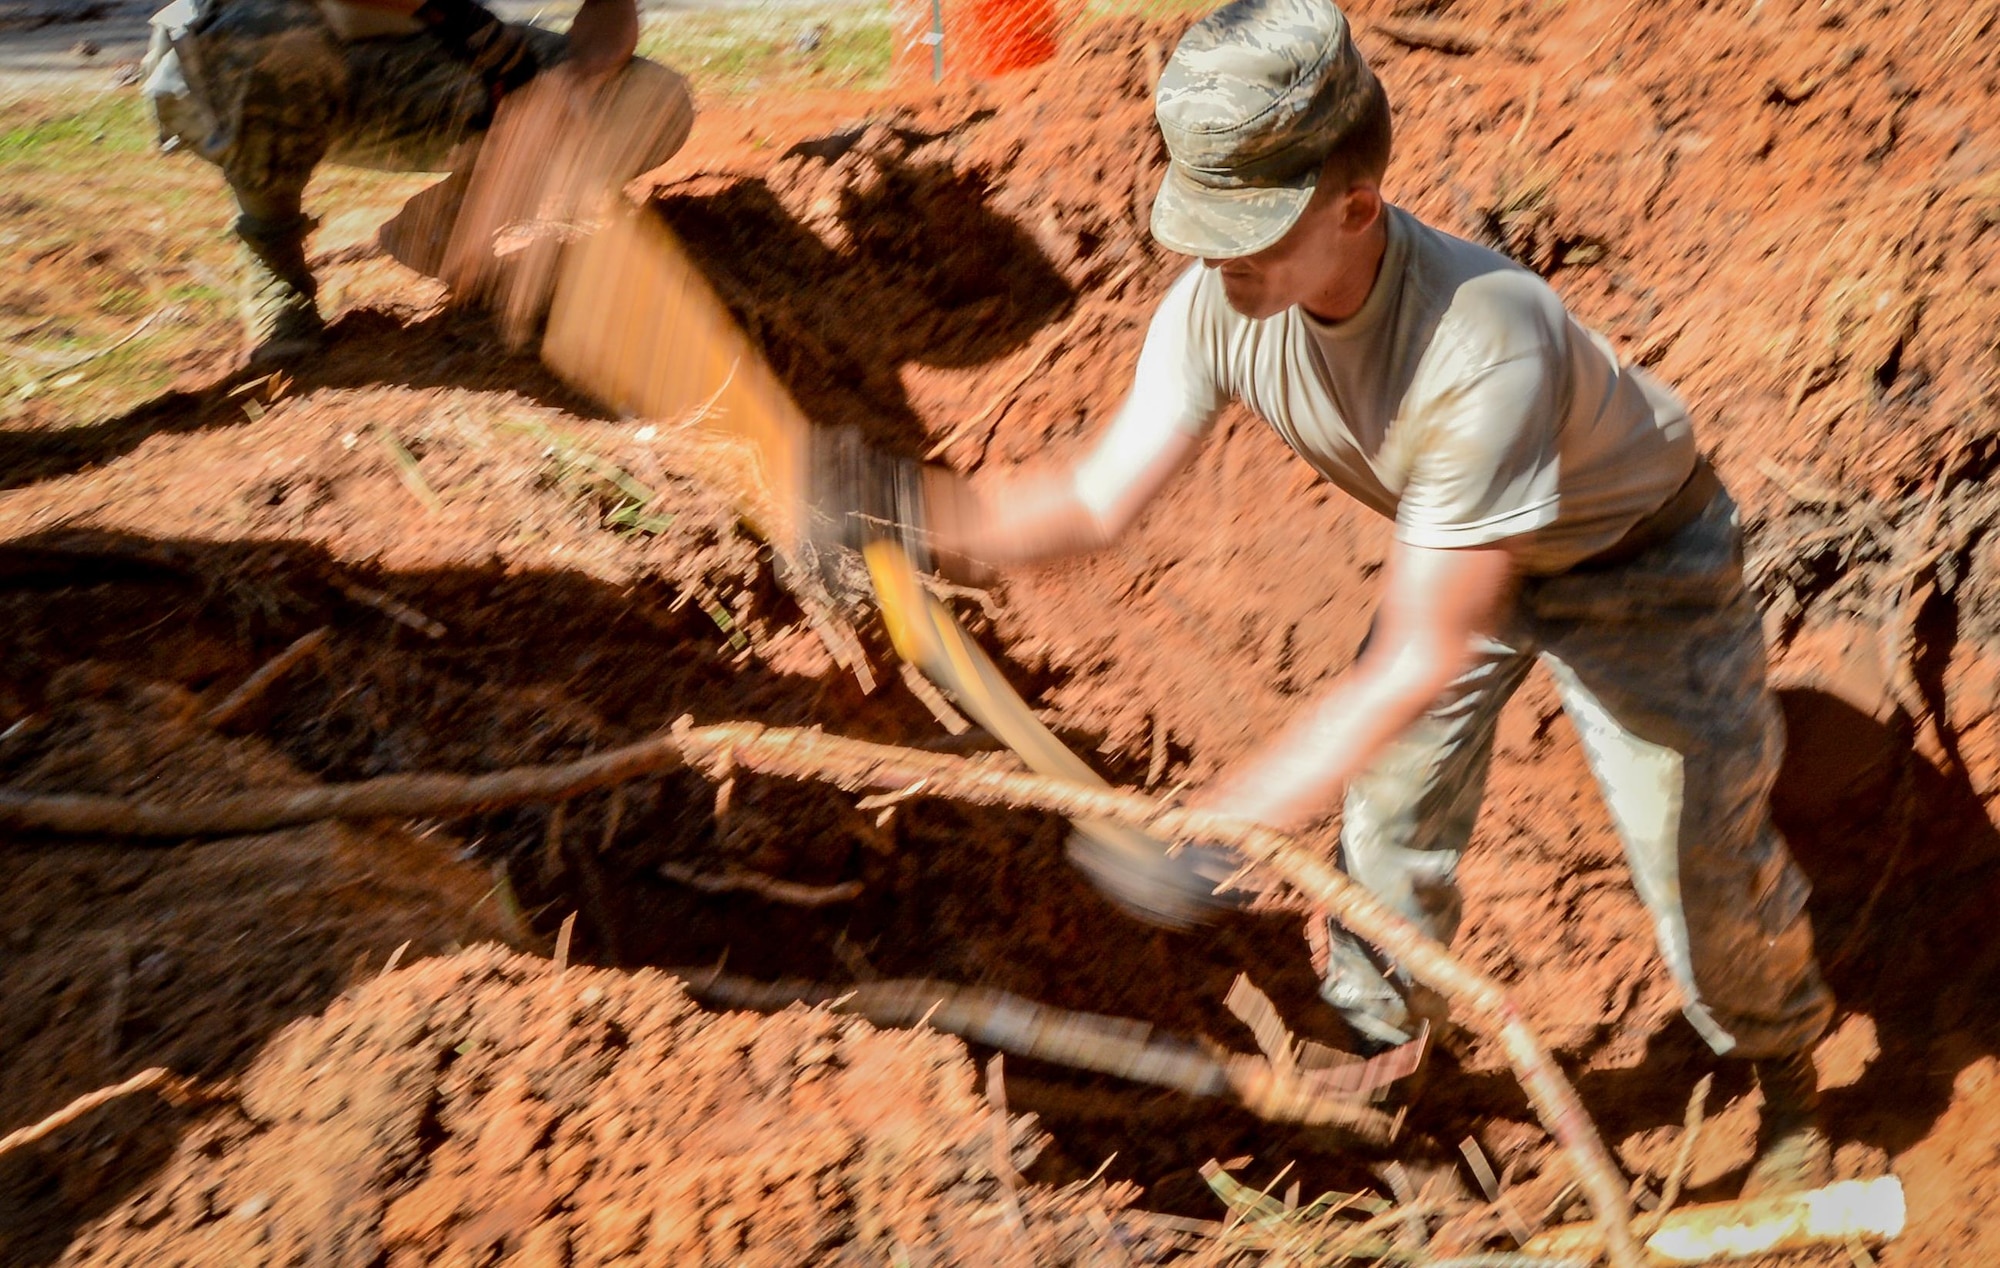 U.S. Air Force Senior Airman Eric Lusinger, 20th Civil Engineer Squadron water and fuels apprentice, breaks up roots to prepare the area to fix a broken water pipe at Shaw Air Force Base, S.C., Oct. 13, 2016. Debris and dirt were removed from the area to expose the broken pipe for repair. (U.S. Air Force photo by Senior Airman Diana M. Cossaboom)